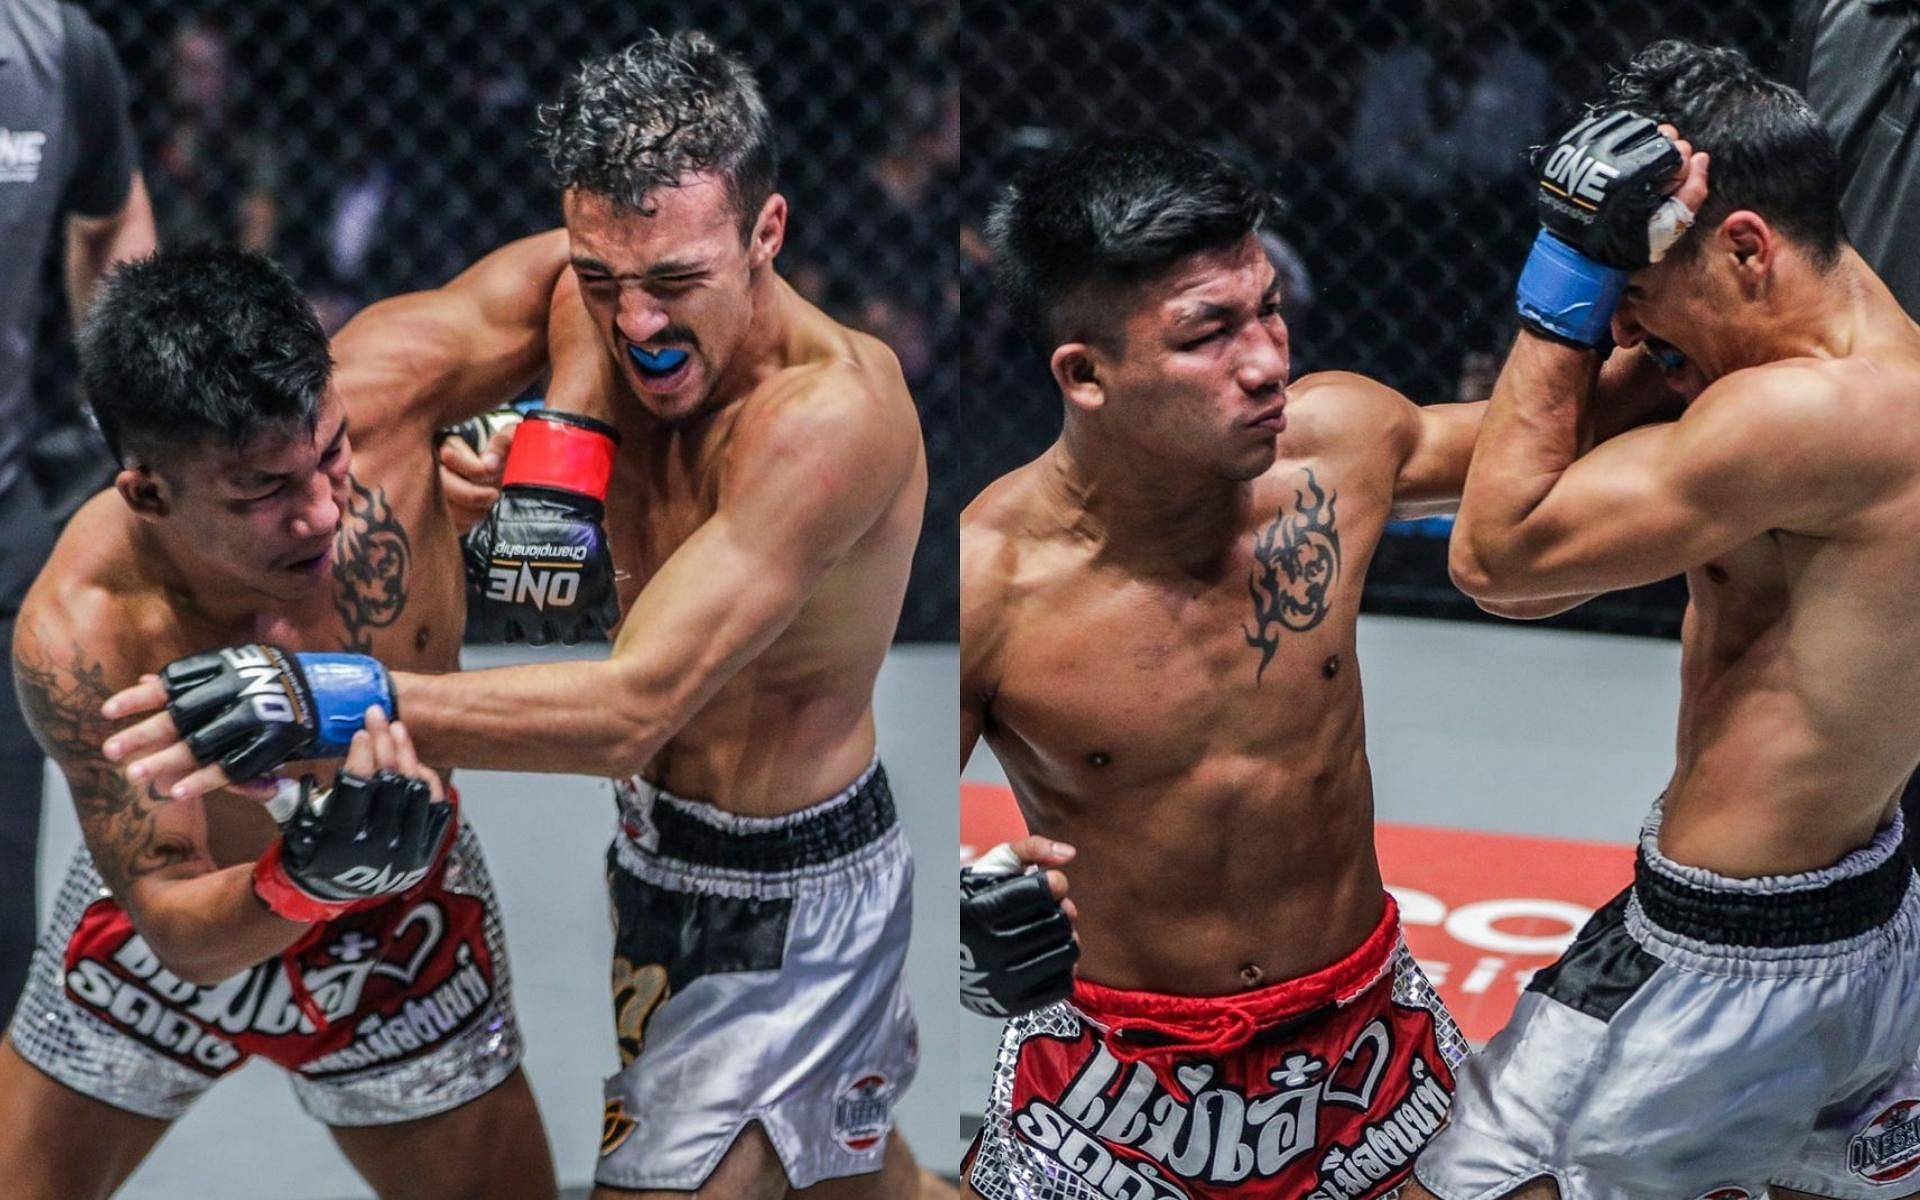 Rodtang Jitmuangnon (left) edged out Hakim Hamech (right) in their 2019 battle. (Images courtesy of ONE Championship)